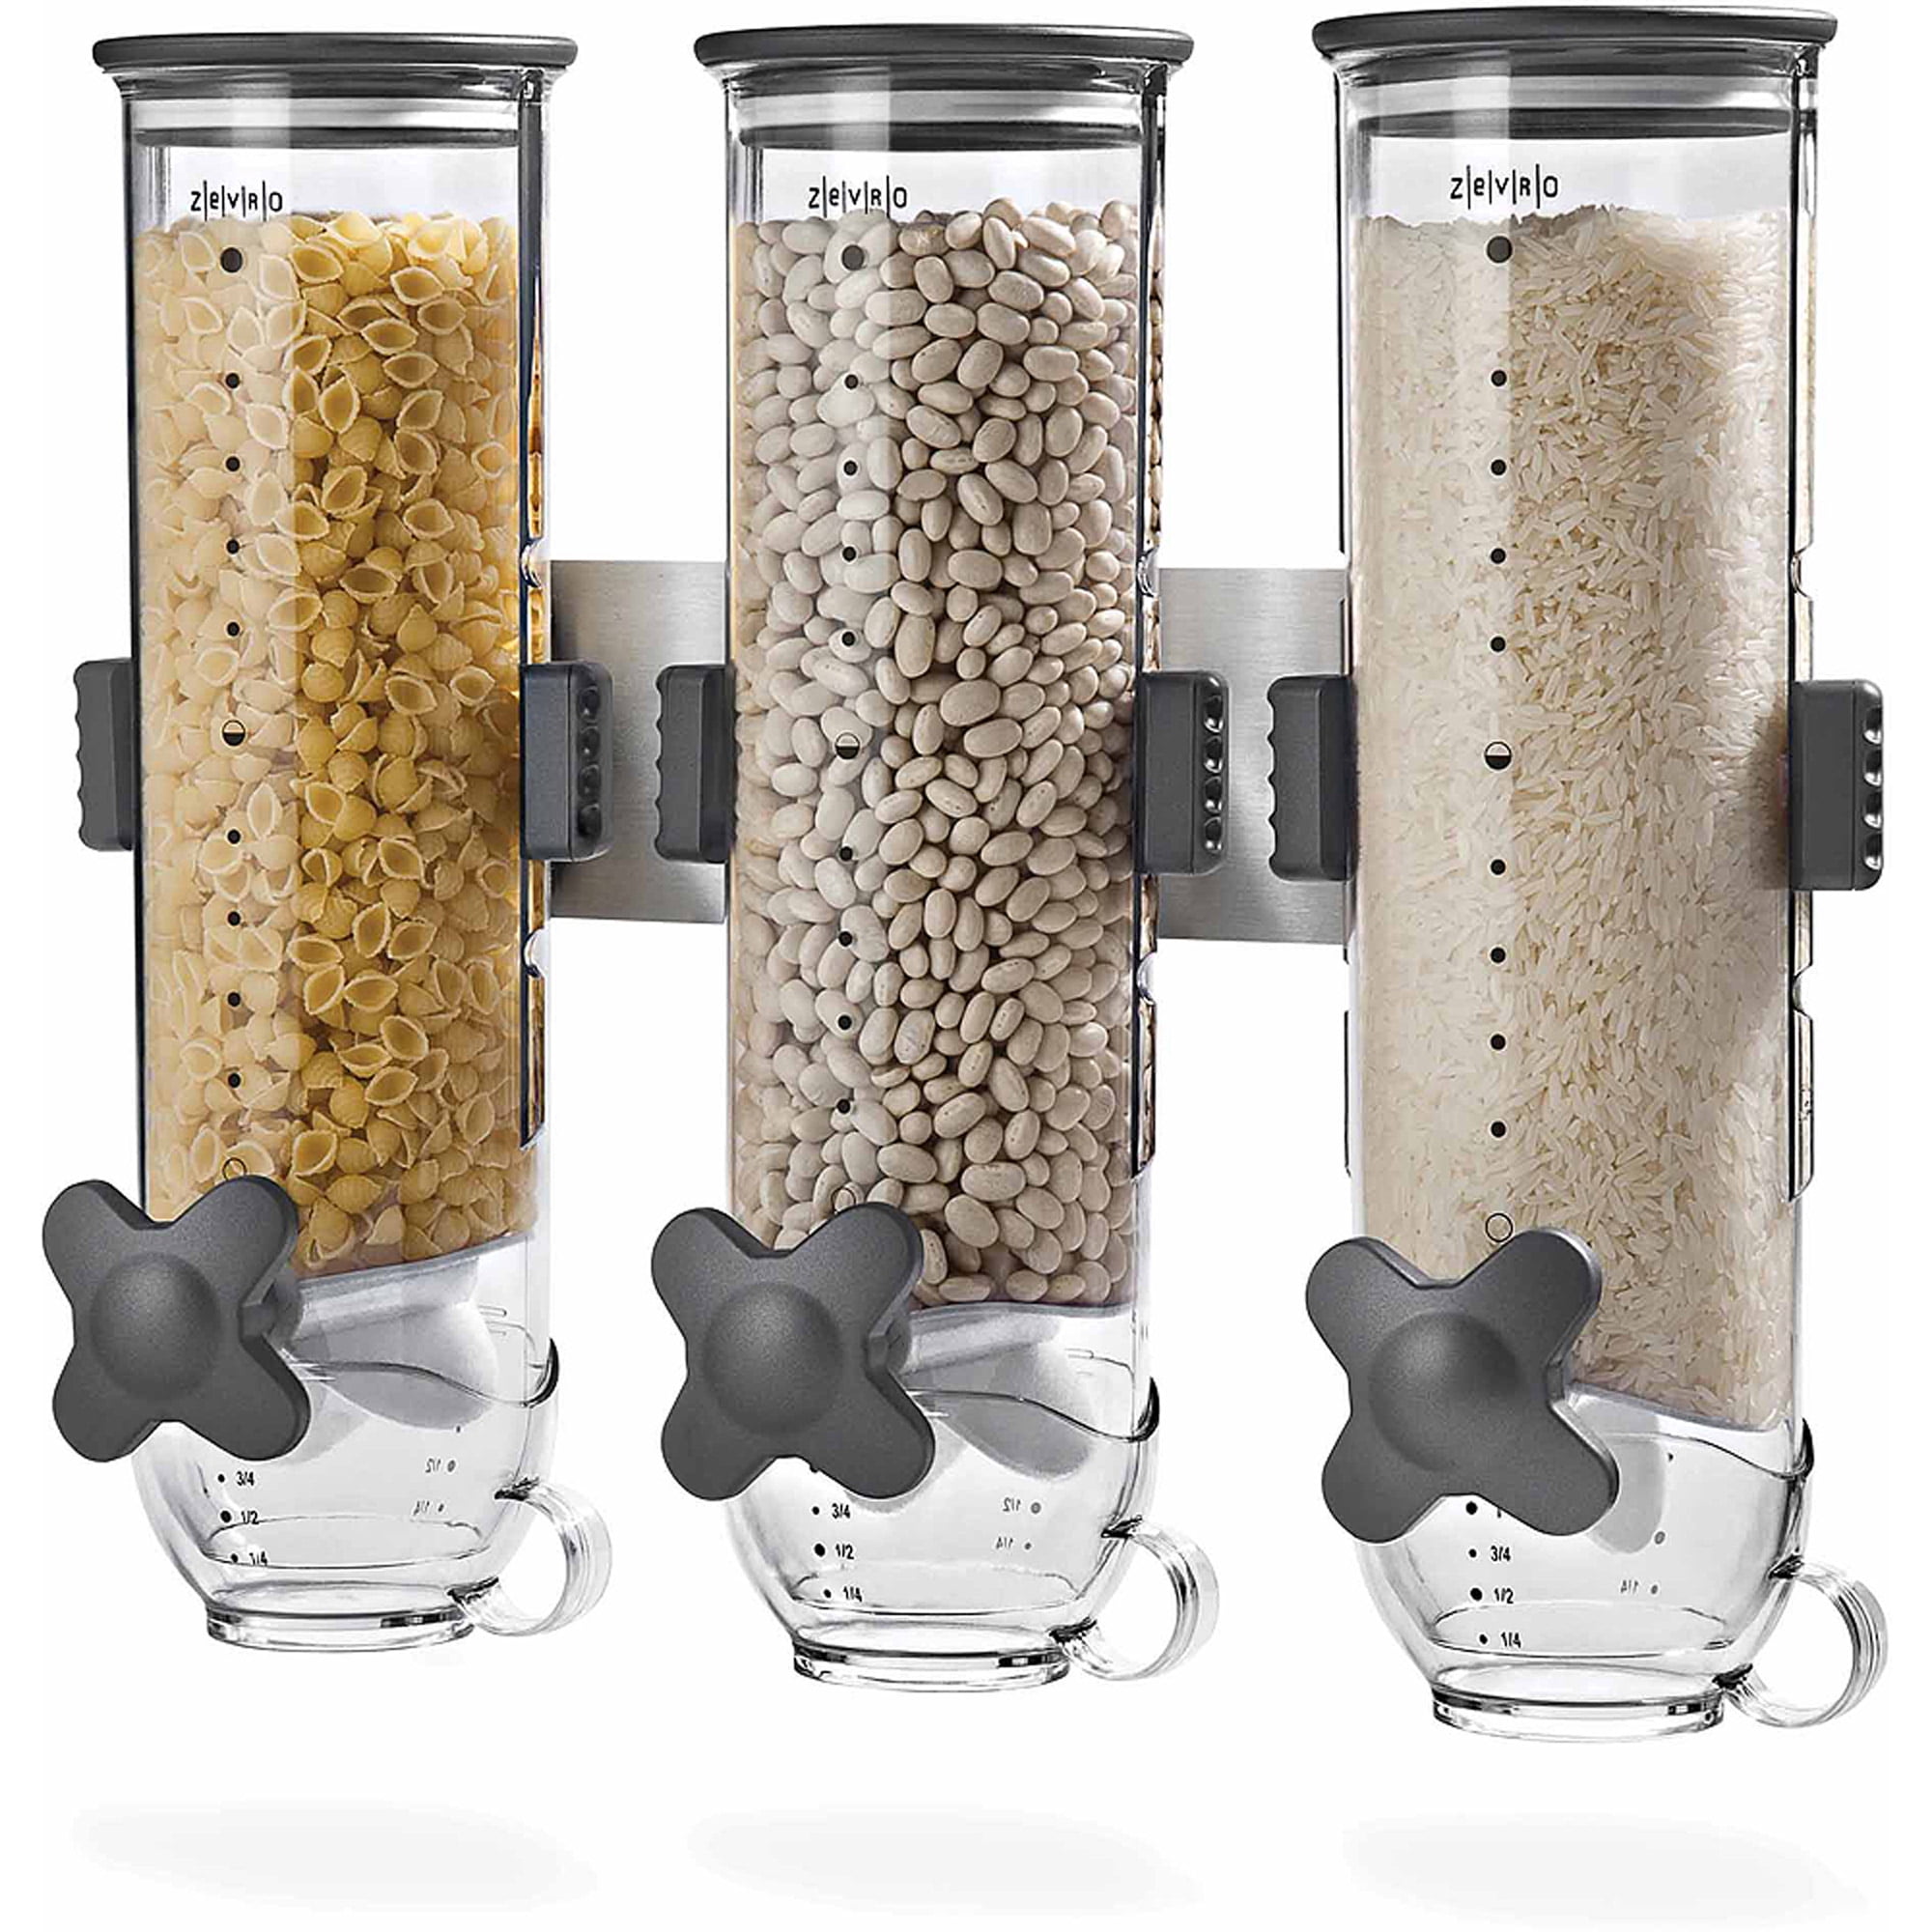 TRIPLE CEREAL DISPENSER DRY FOOD STORAGE CONTAINER DISPENSER MACHINE WALL MOUNT 